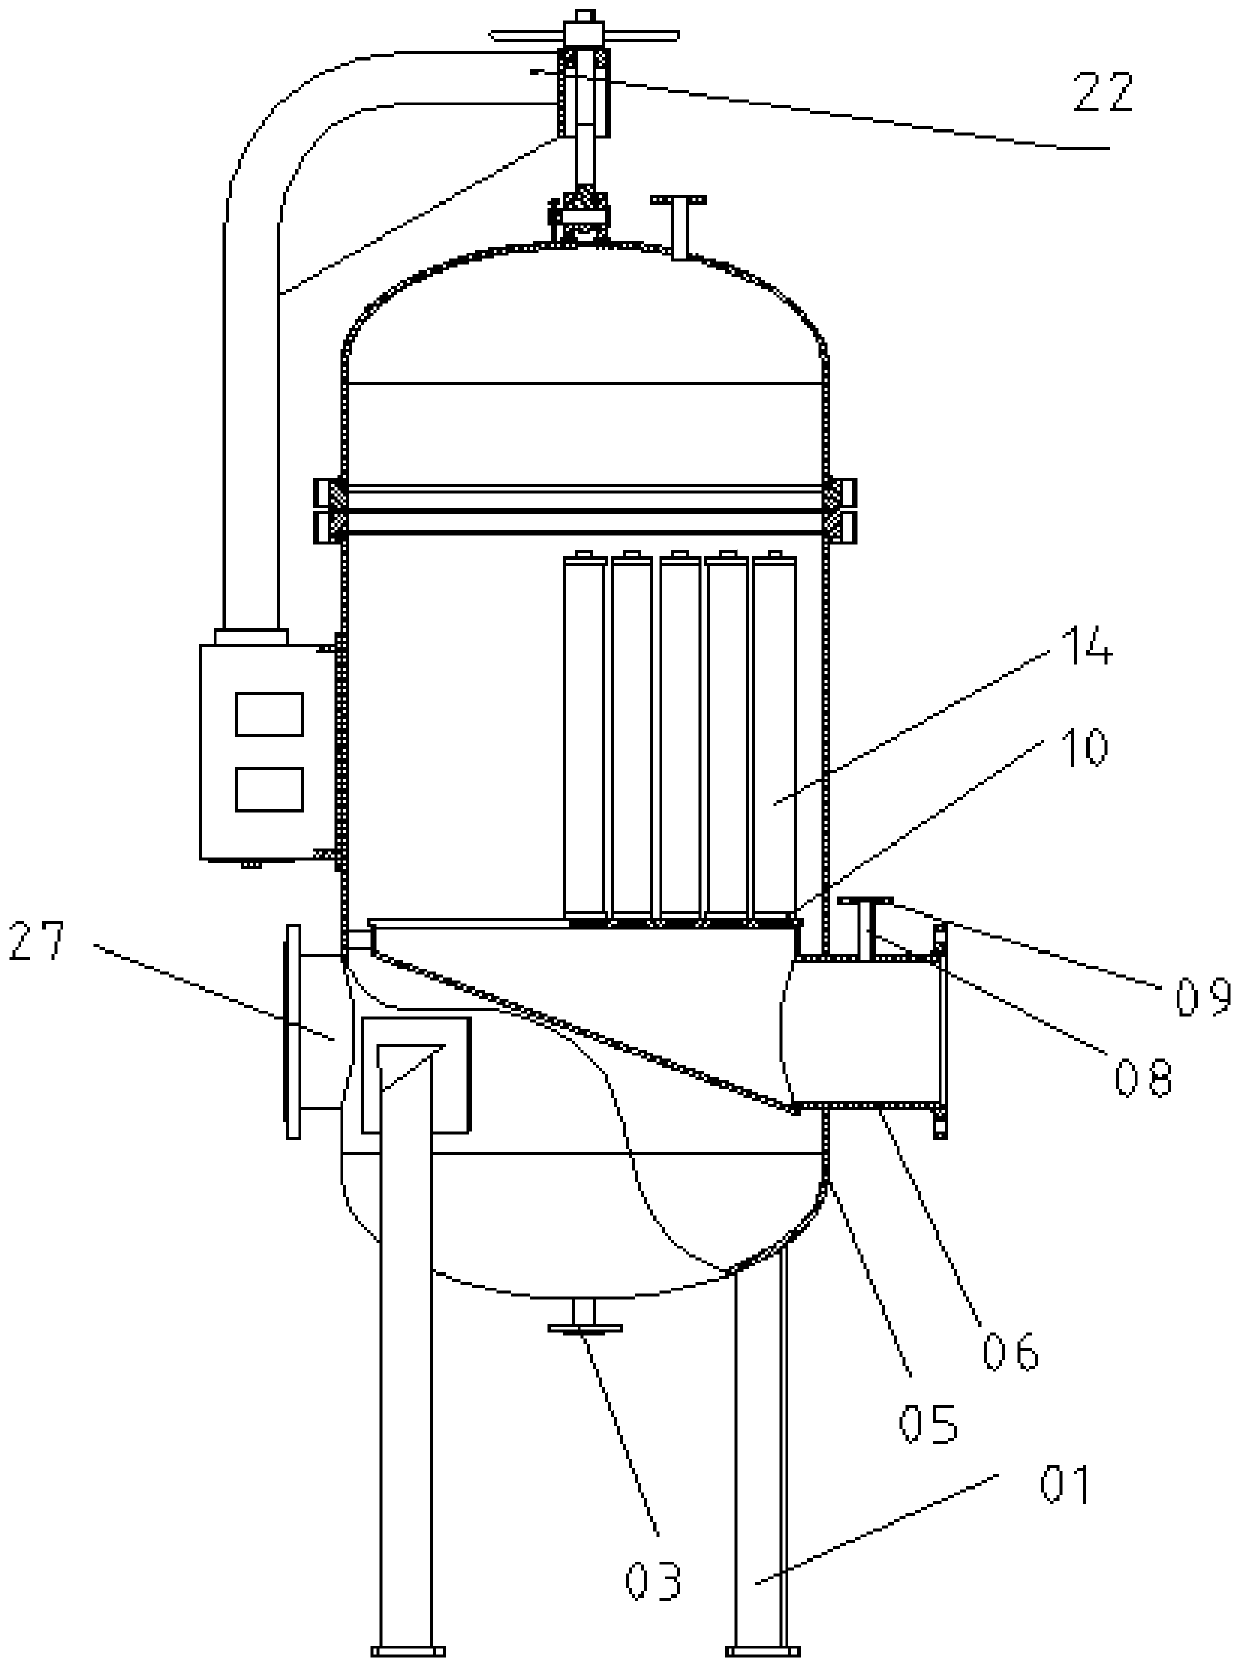 Methanol filtering device, system and method for wax removal of methanol system